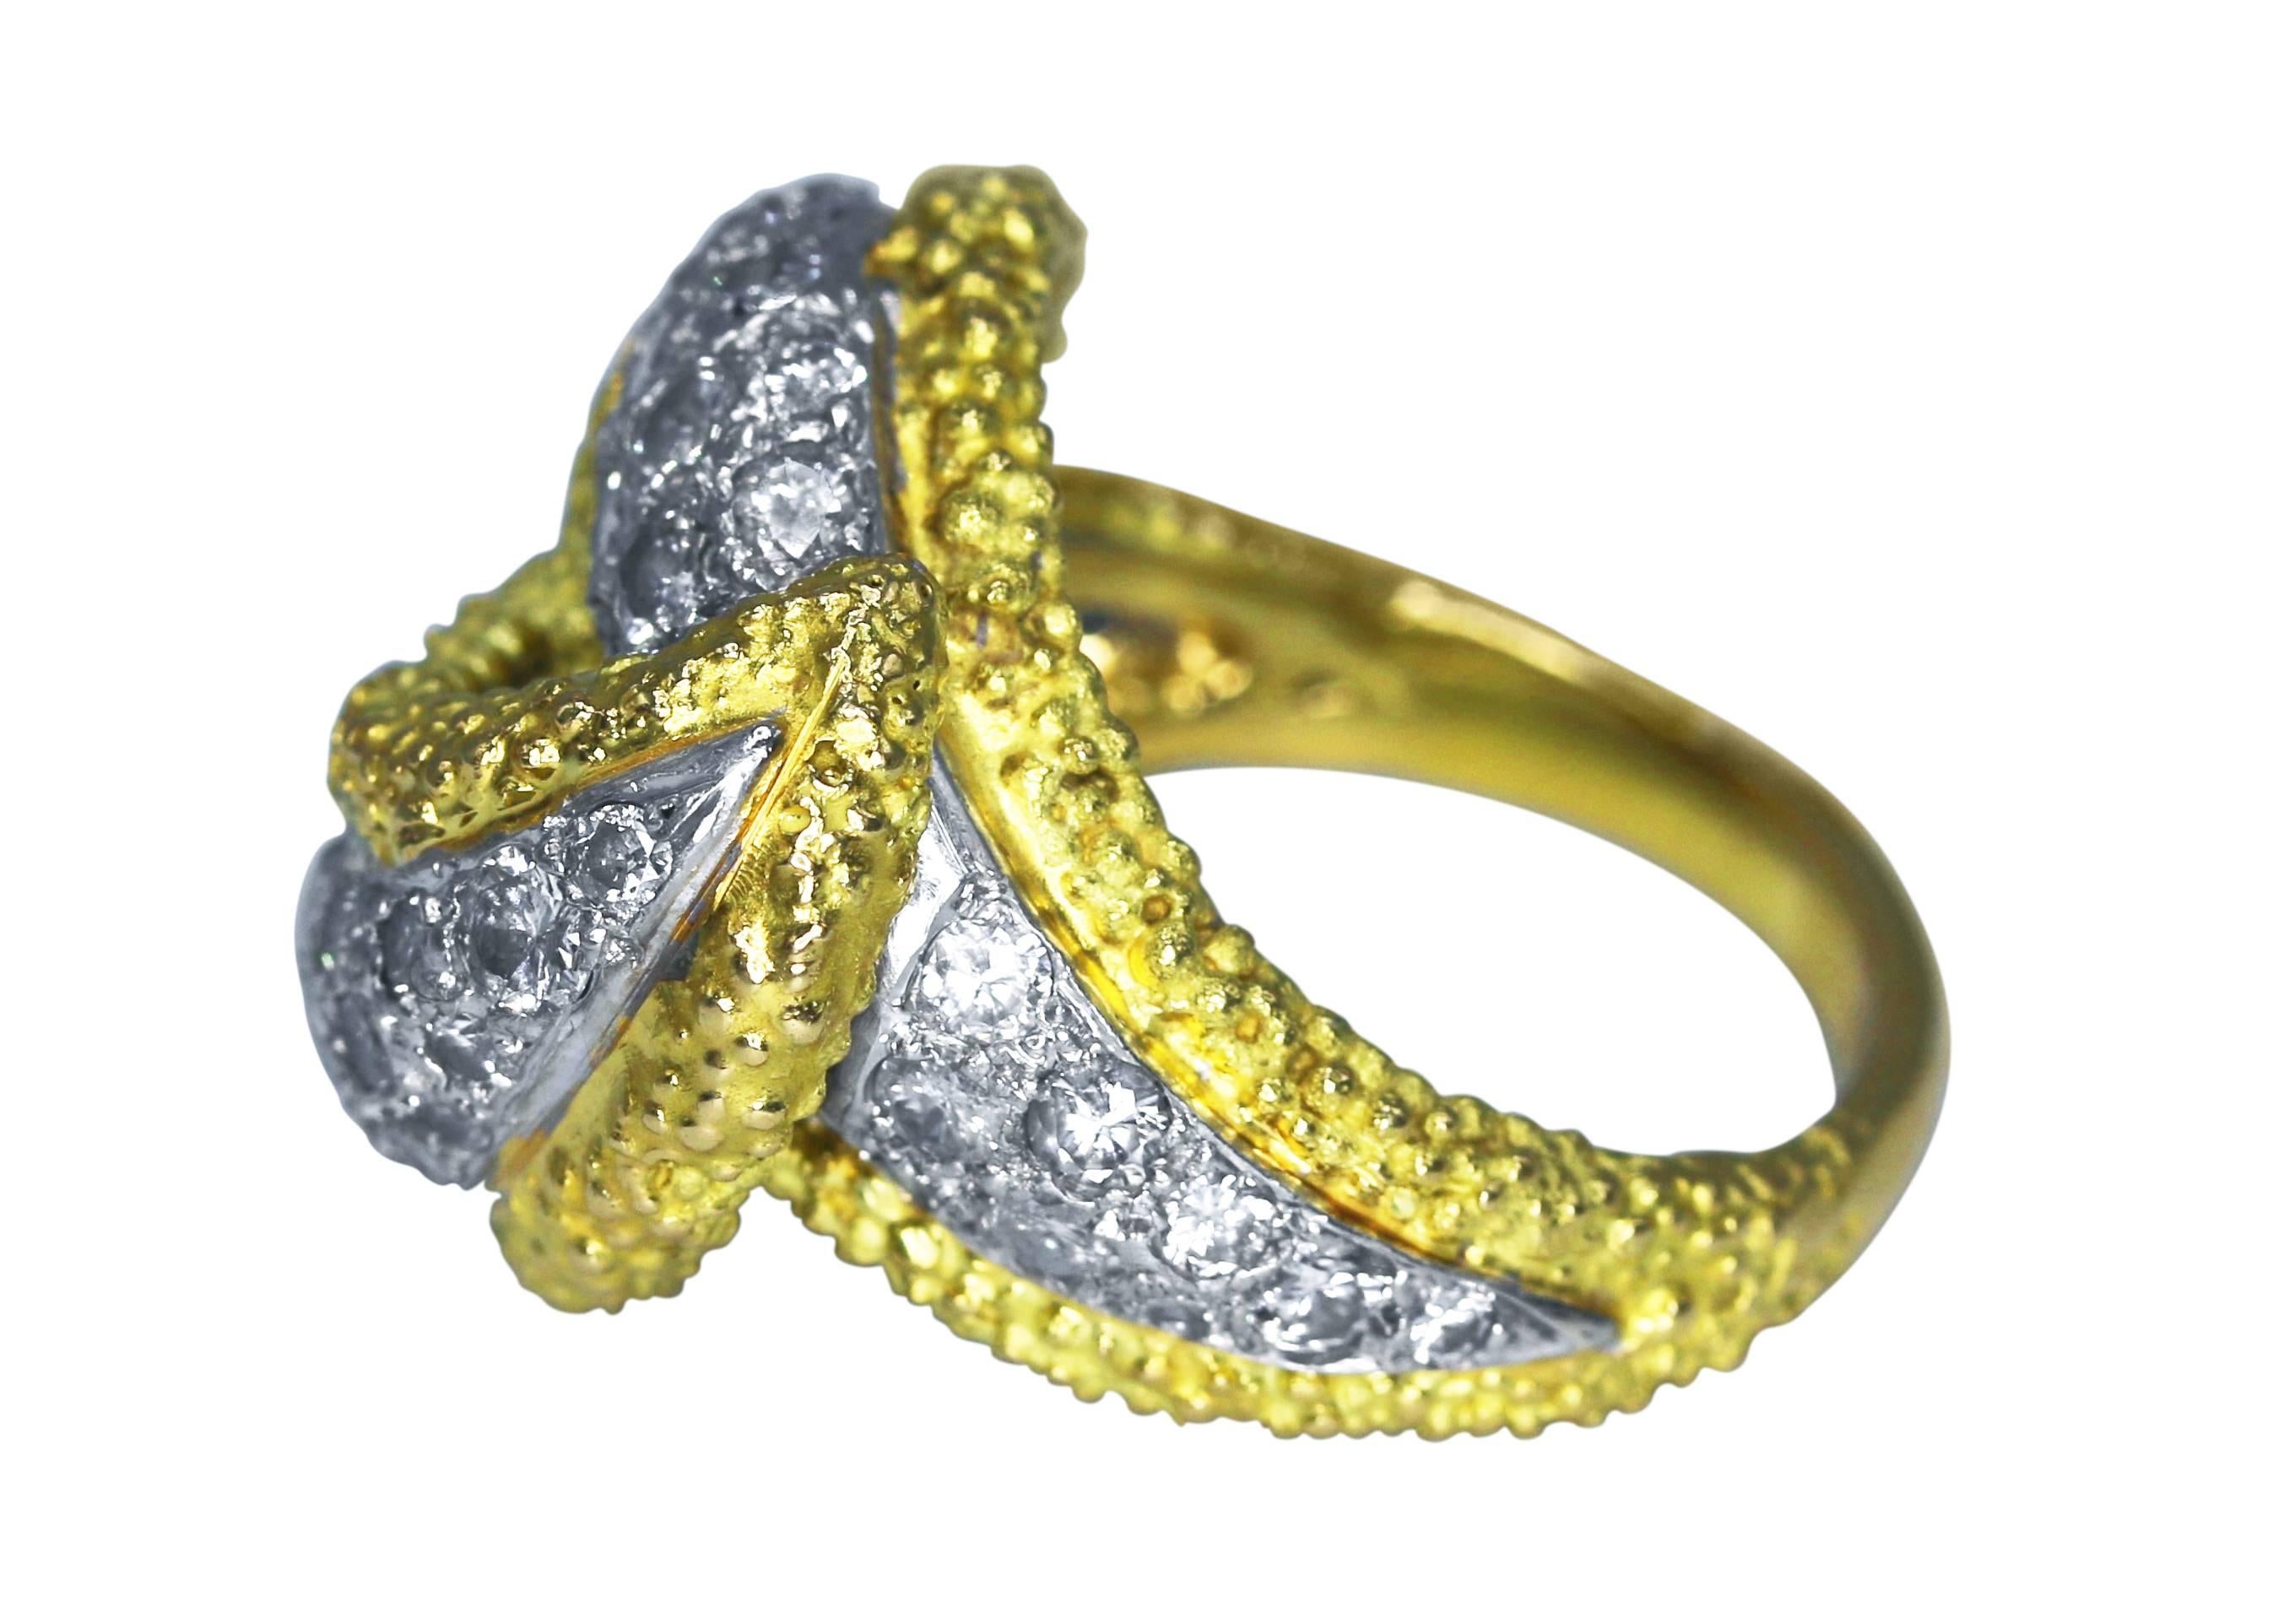 18 karat white and yellow gold and diamond ring, circa 1970, of cross over design with white gold center set with round diamonds weighing approximately 2.60 carats, within textured yellow gold borders, size 5 1/2, gross weight 12.4 grams, measuring